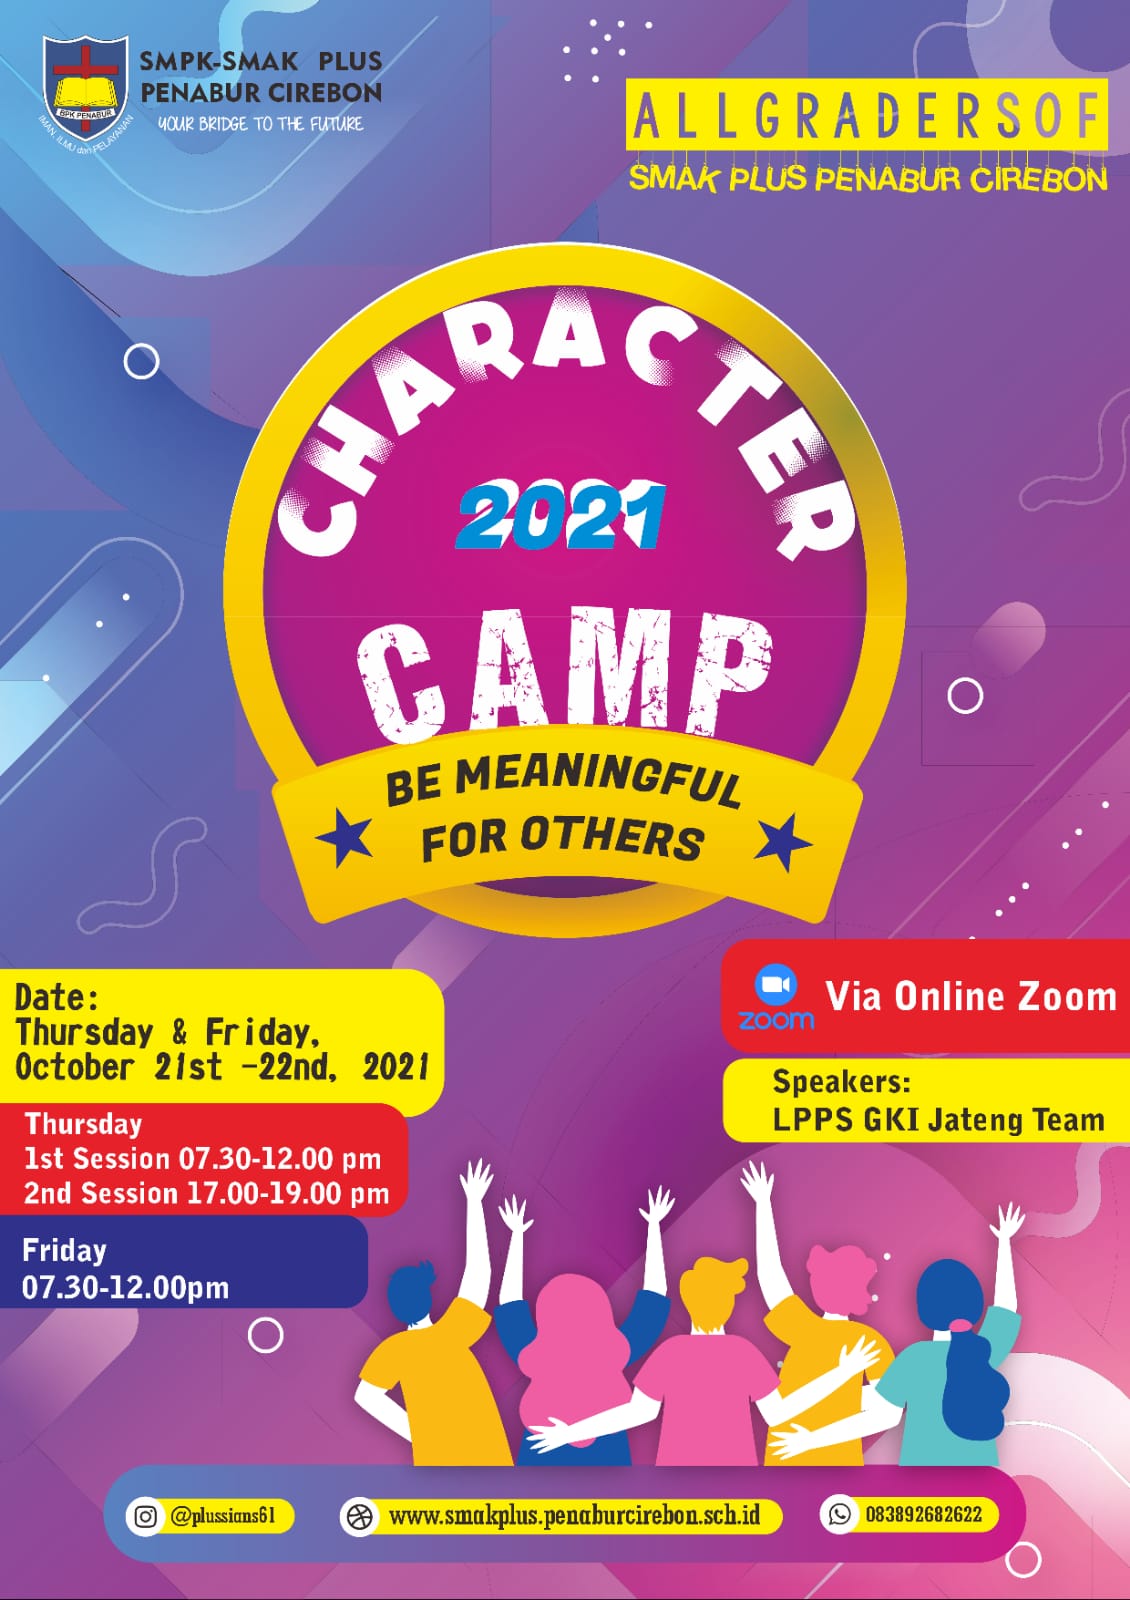 CHARACTER CAMP 2021 BE MEANINGFUL FOR OTHERS